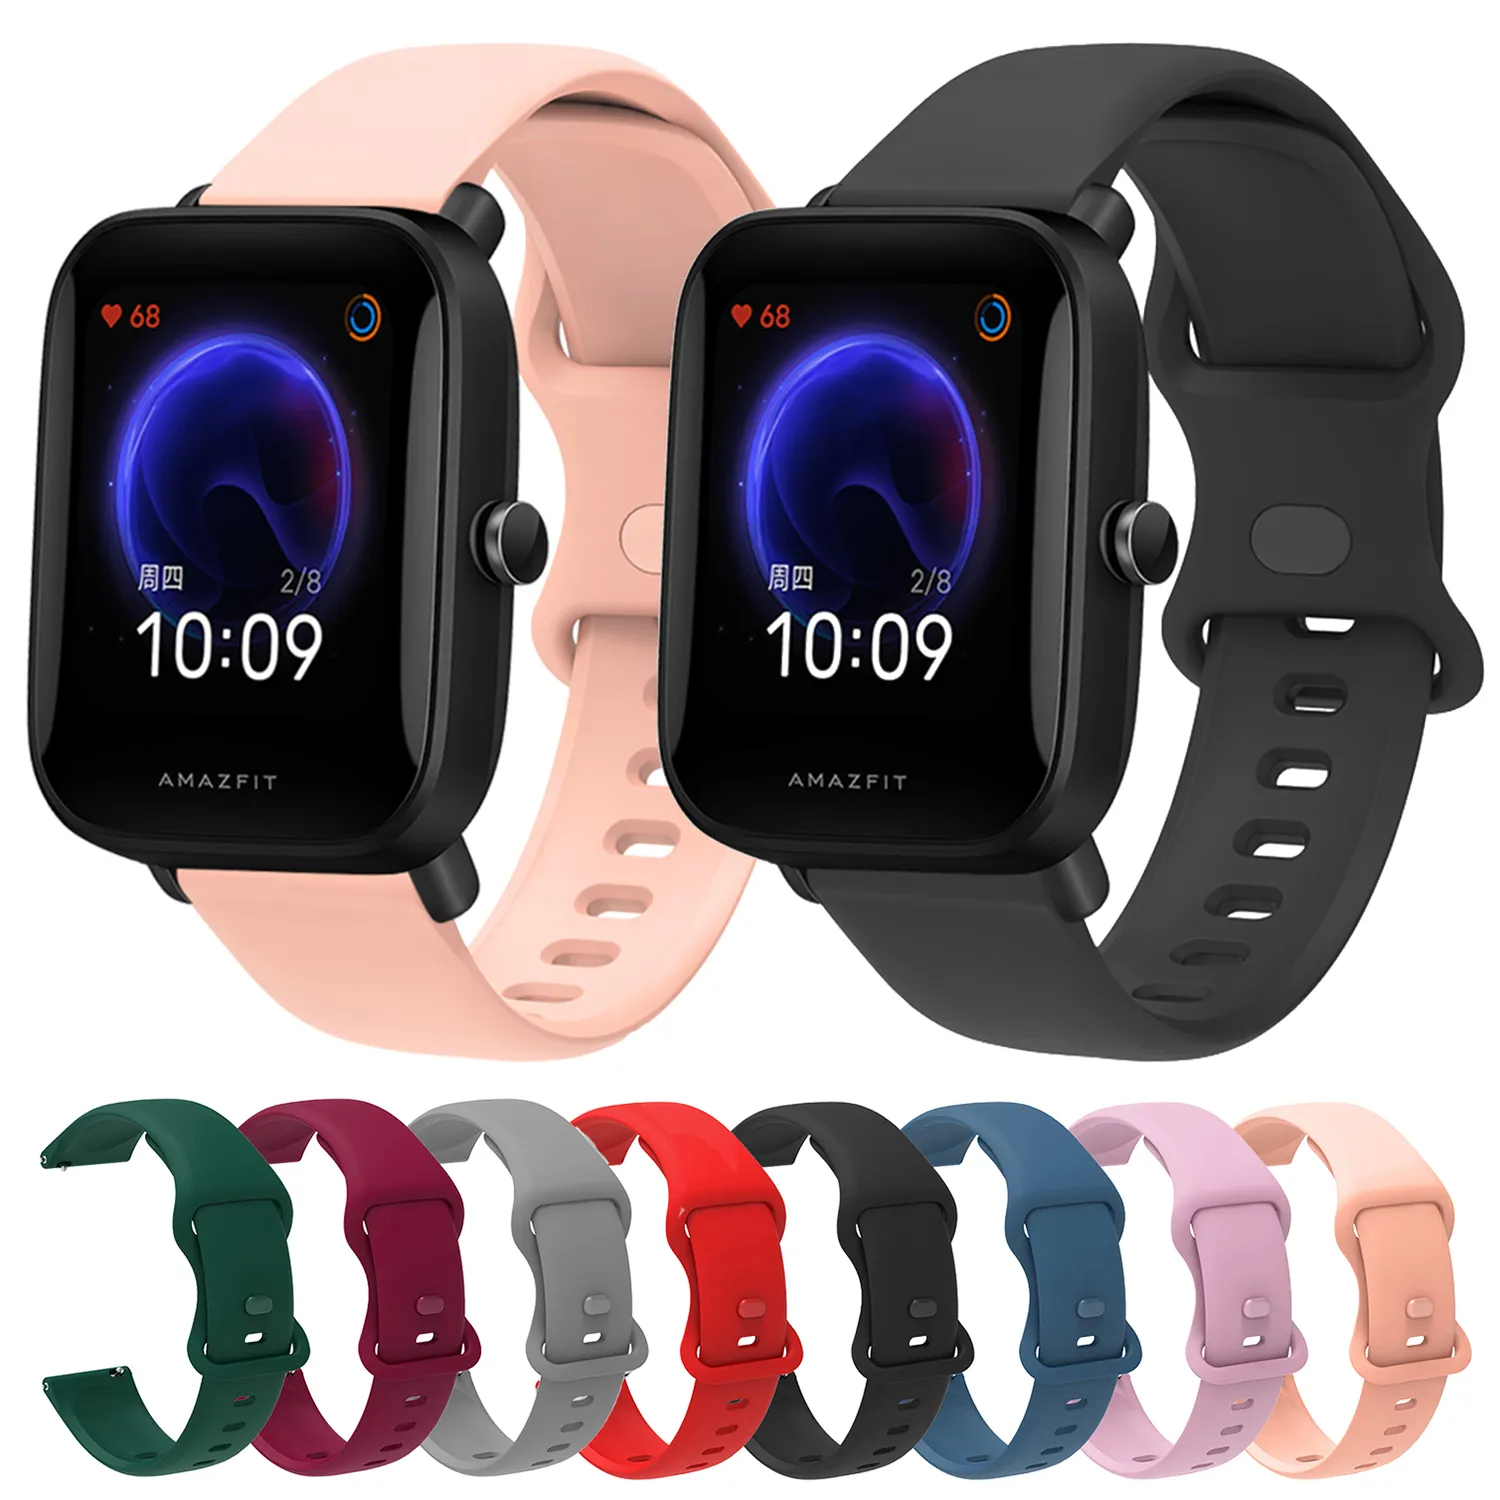 20mm Silicone Strap for Huami Amazfit Pop Pro Smart Watch Band for Huami Amazfit Bip 3 Bip S/U Pro